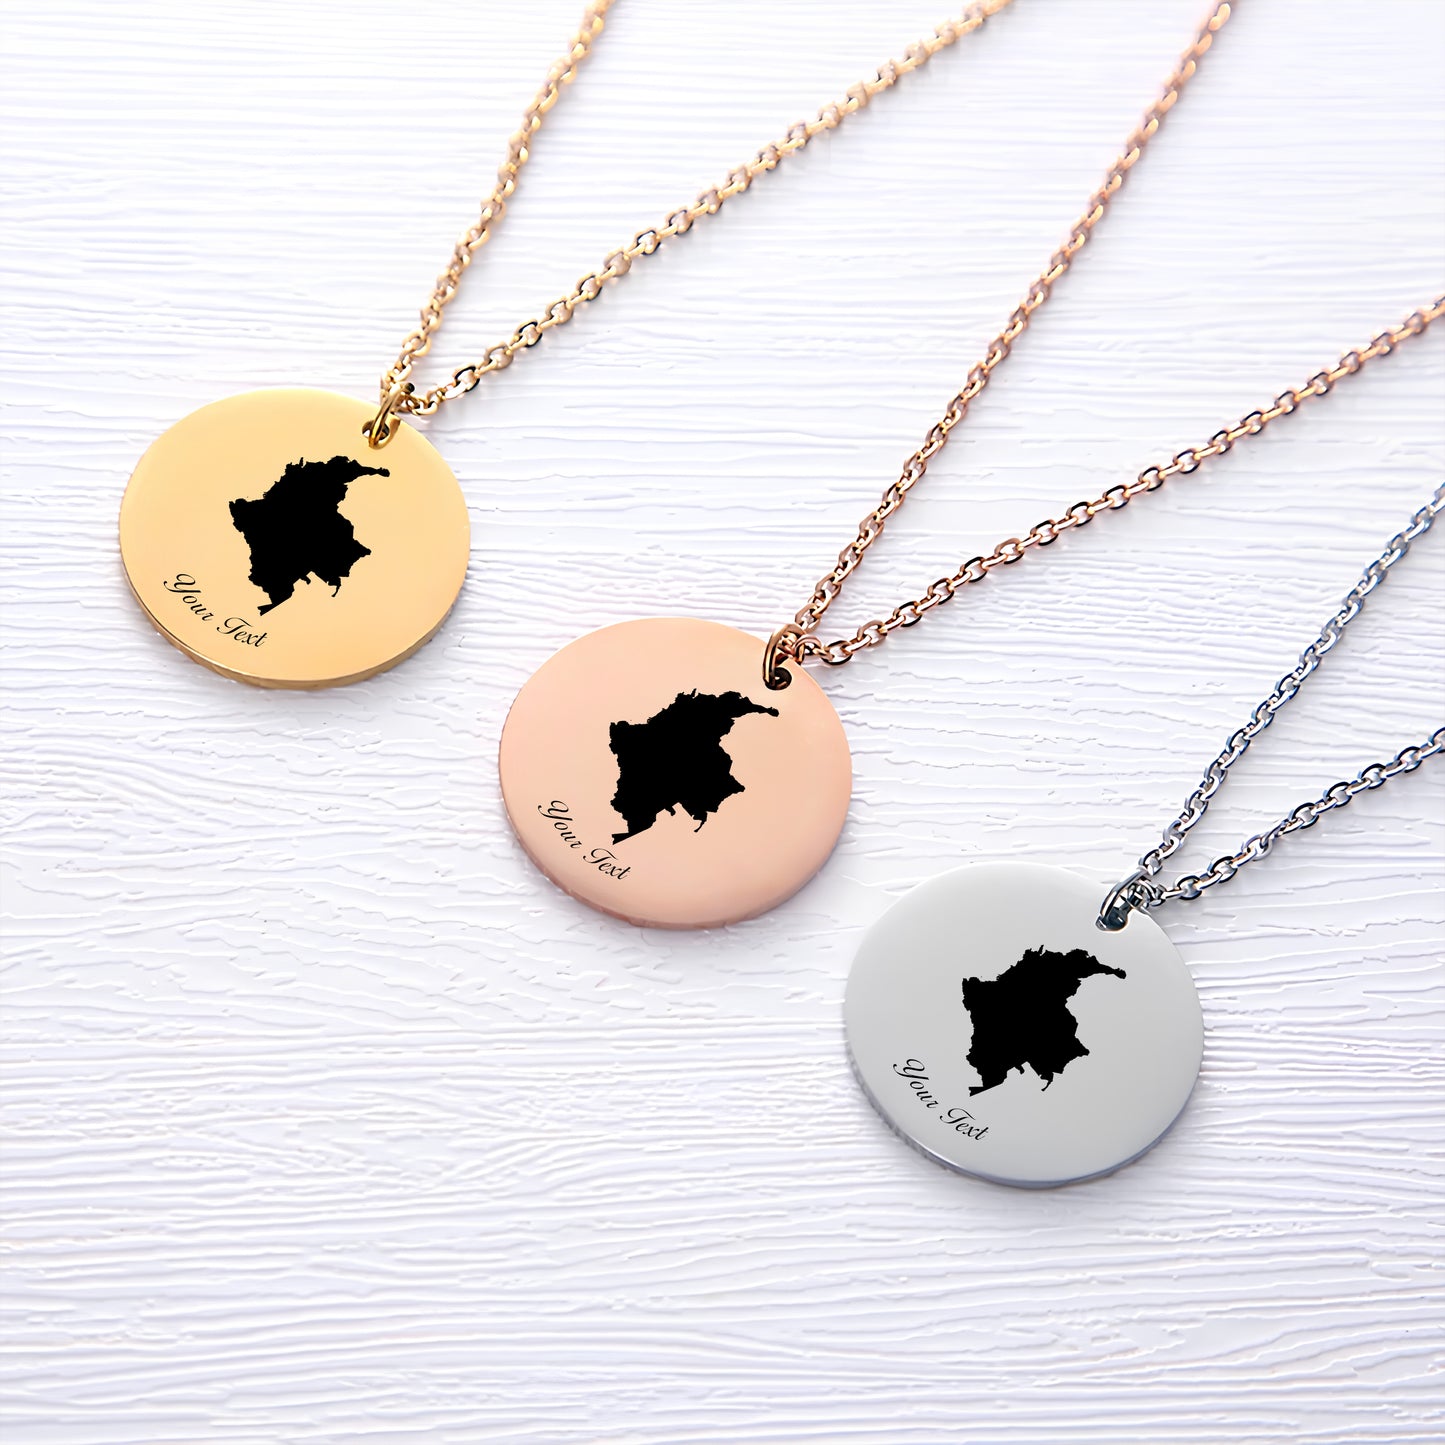 Colombia Country Map Necklace - Personalizable Jewelry